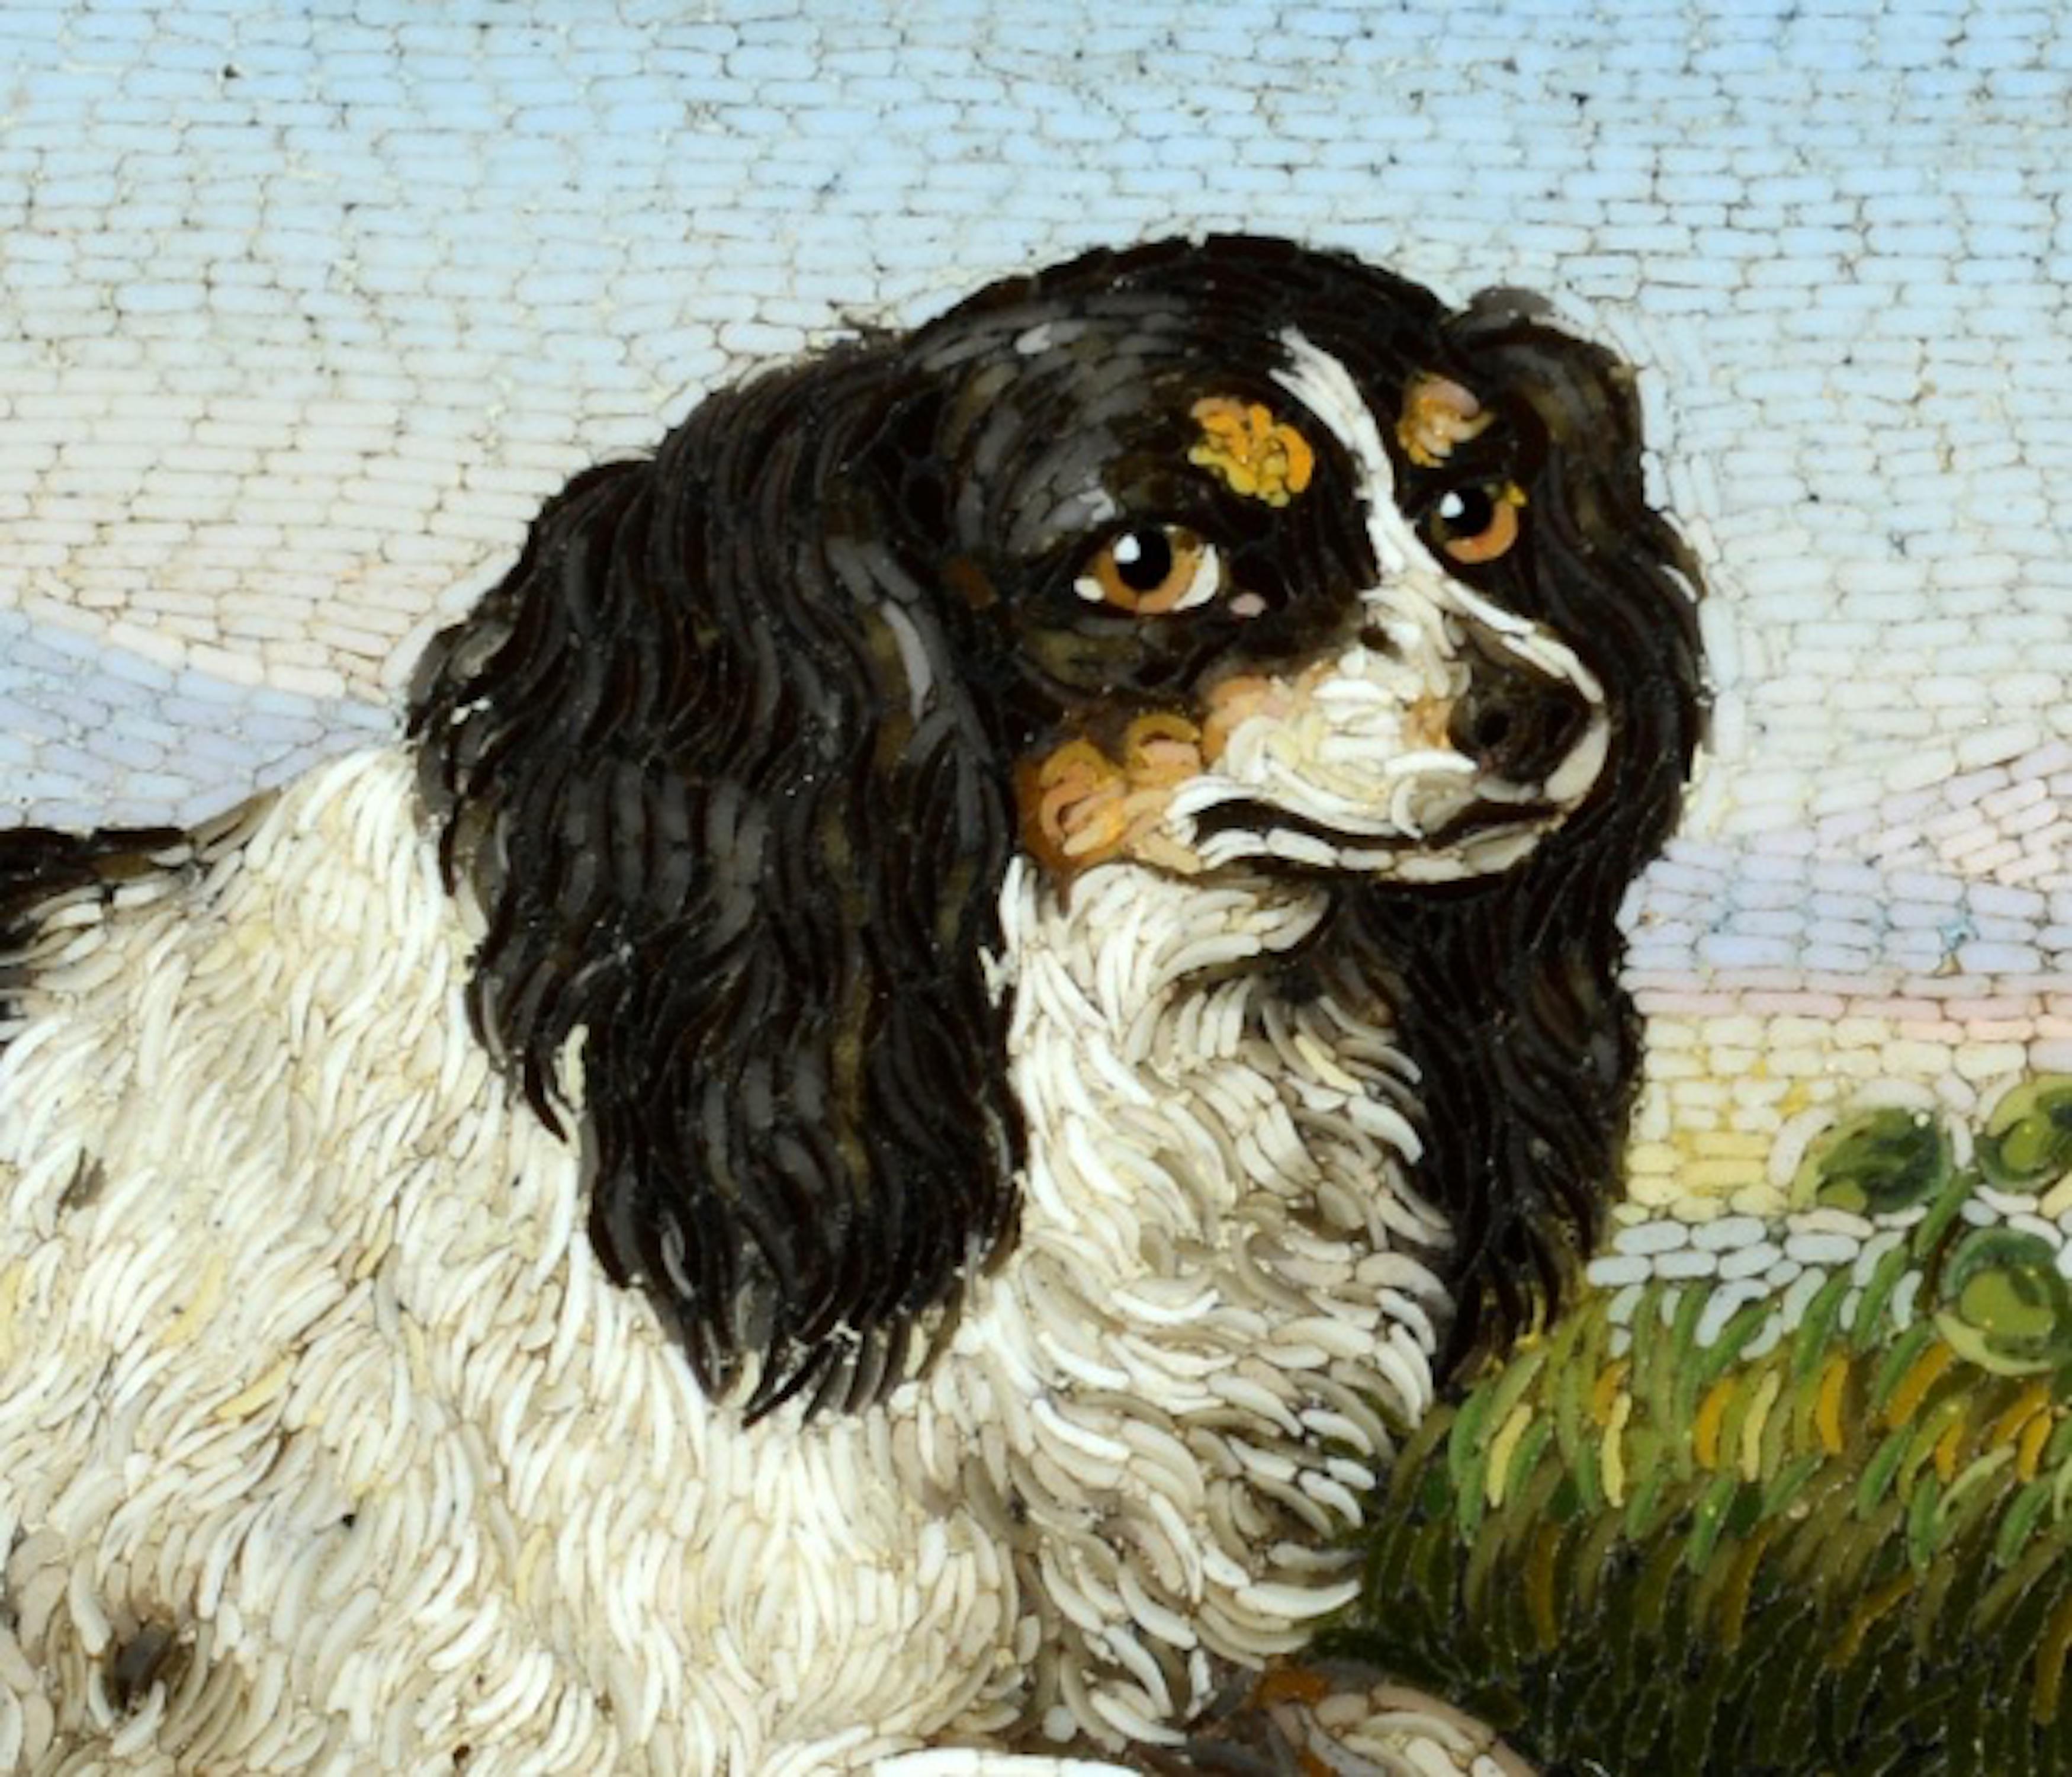 A Very Fine Micro-mosaic Brooch Depicting a Classic King Charles Spaniel c1830, attributed to Luigi Cavaliere Moglia, Roman School (c1813-1878). He was one of the most esteemed mosaic artists of all time. In 1851 he won a gold medal at the 'Great